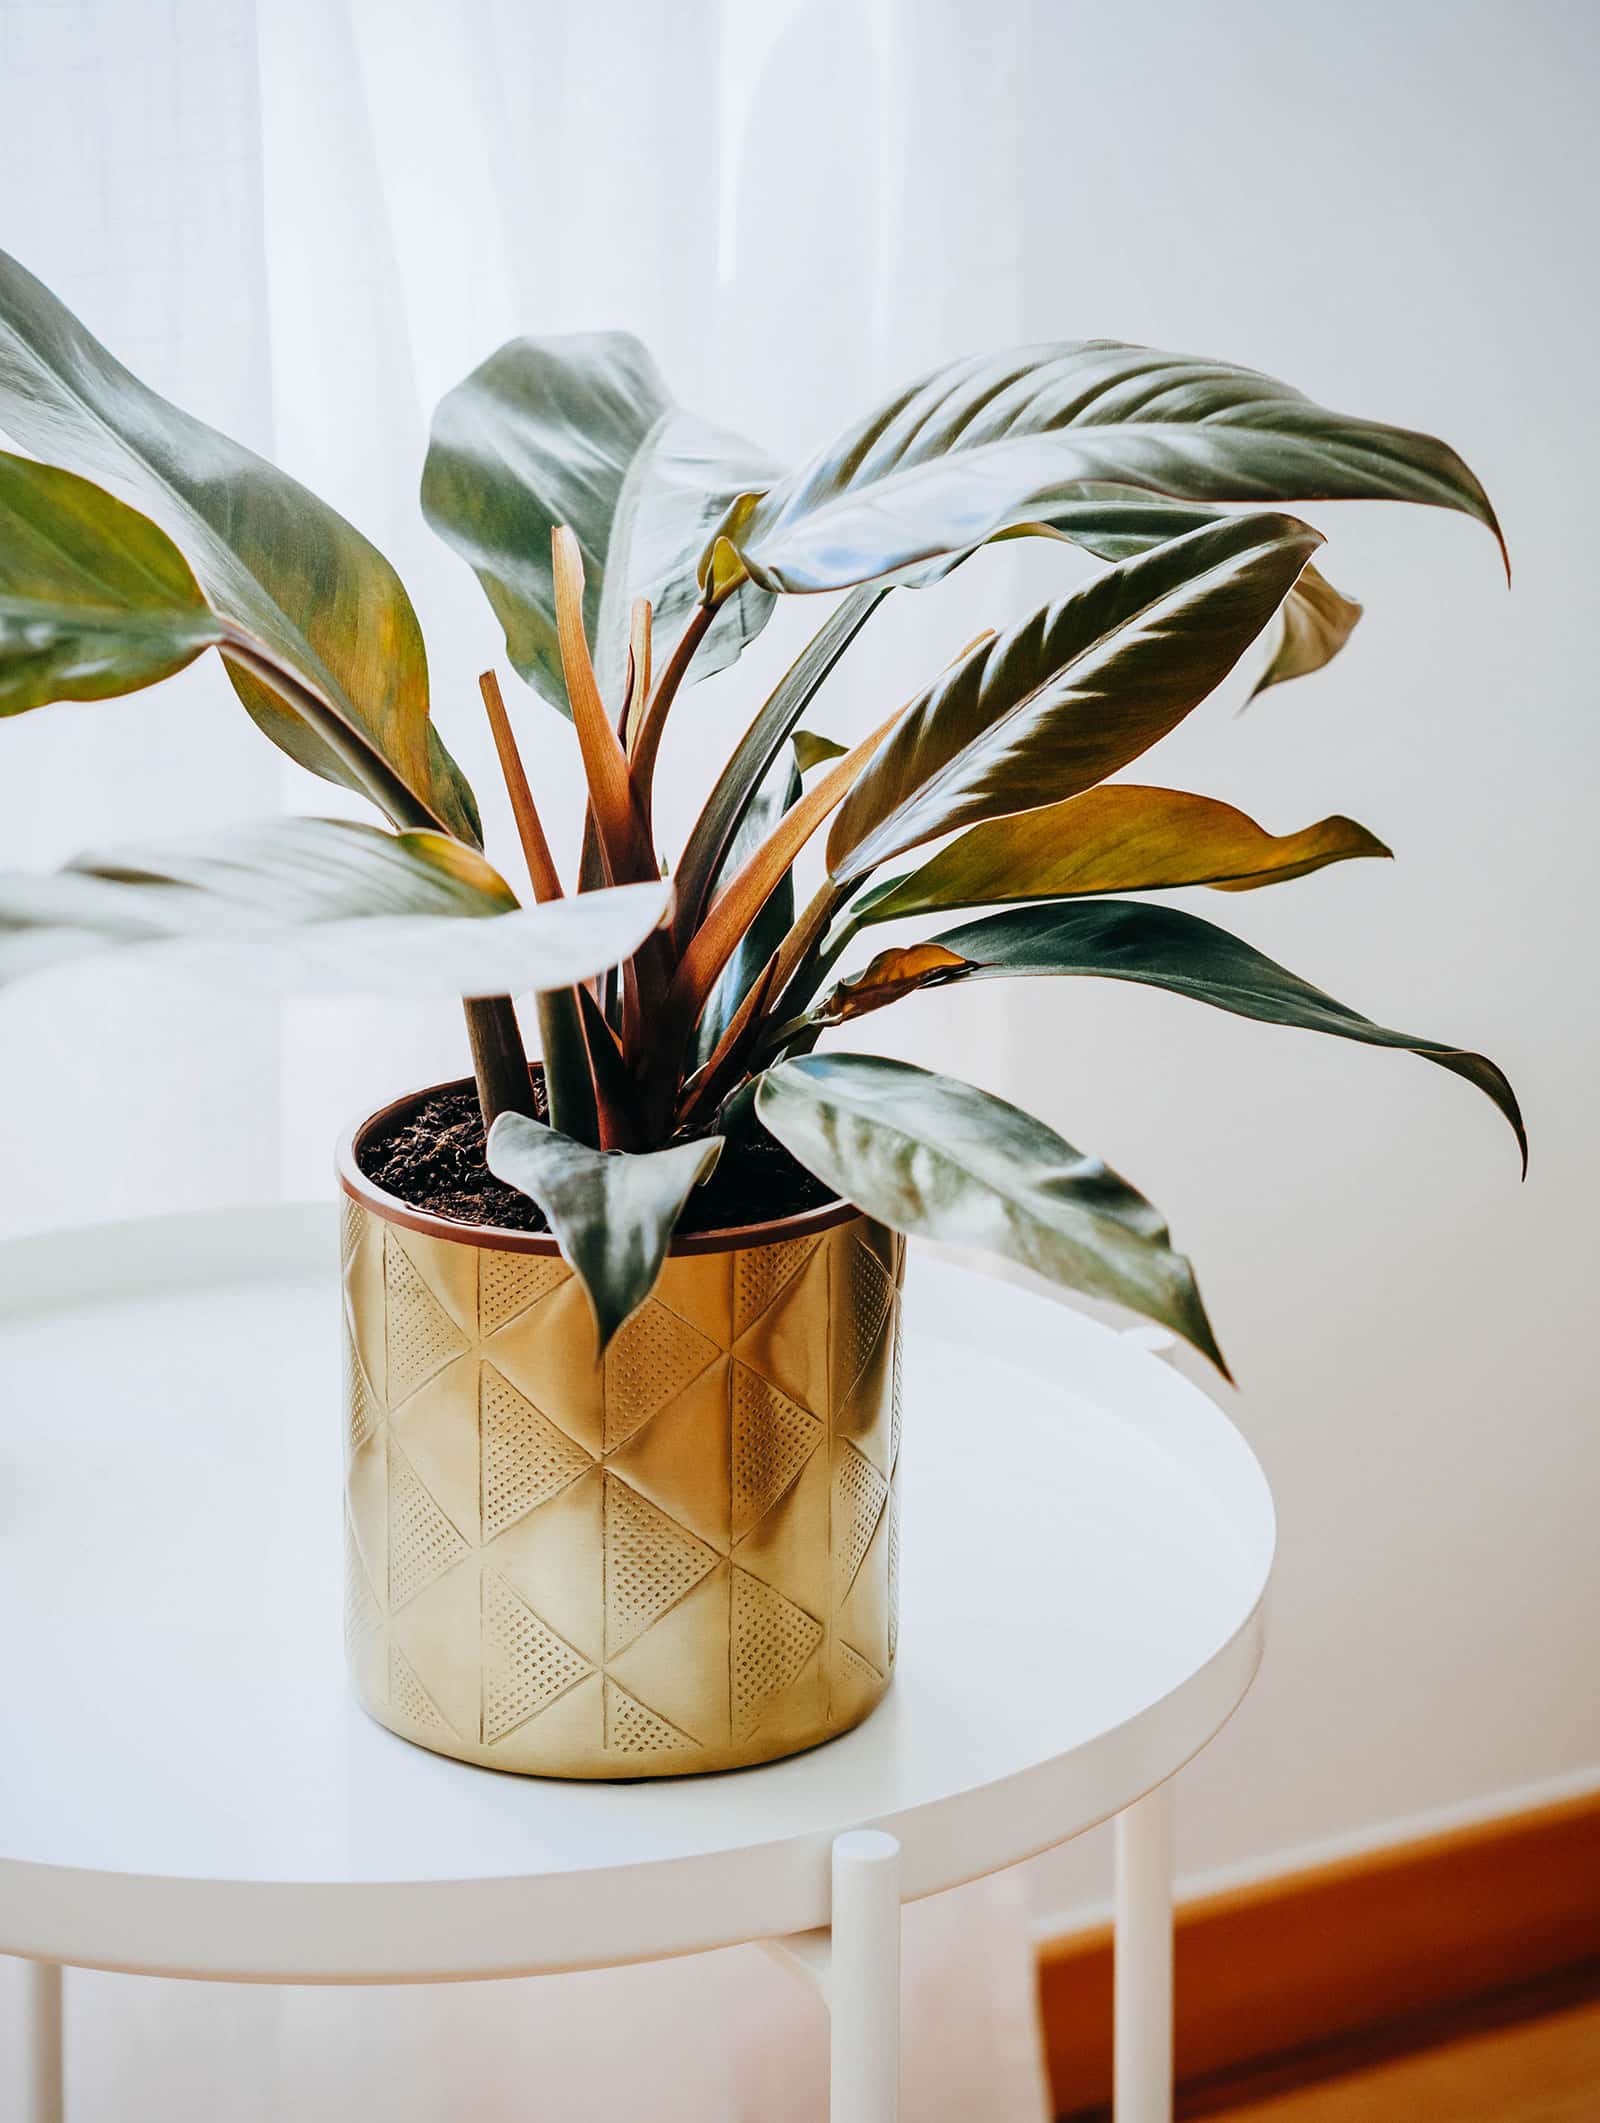 Philodendron 'Imperial Red' houseplant in a decorative gold pot, placed on a white side table against a white wall with white curtains behind it